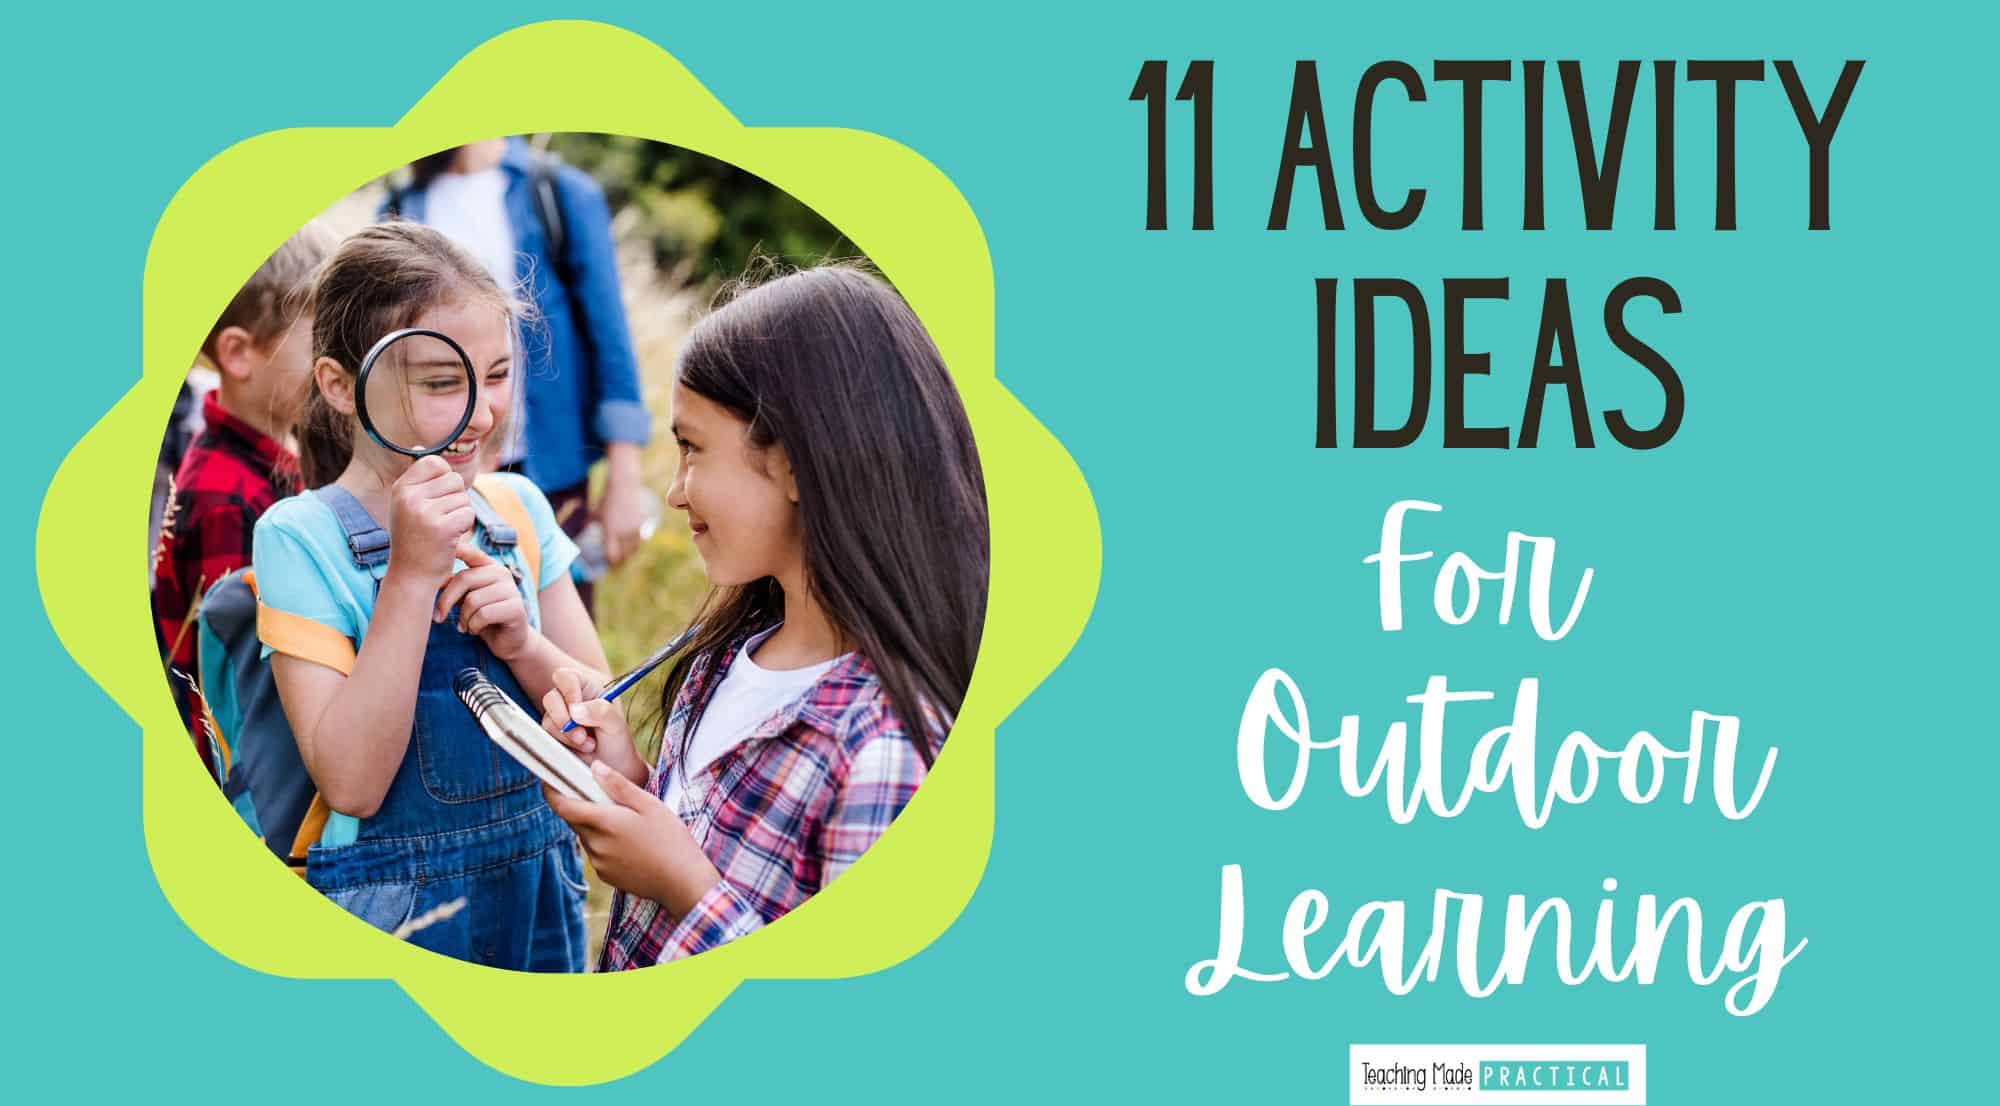 Outdoor Learning Activity Ideas for Upper Elementary Classrooms